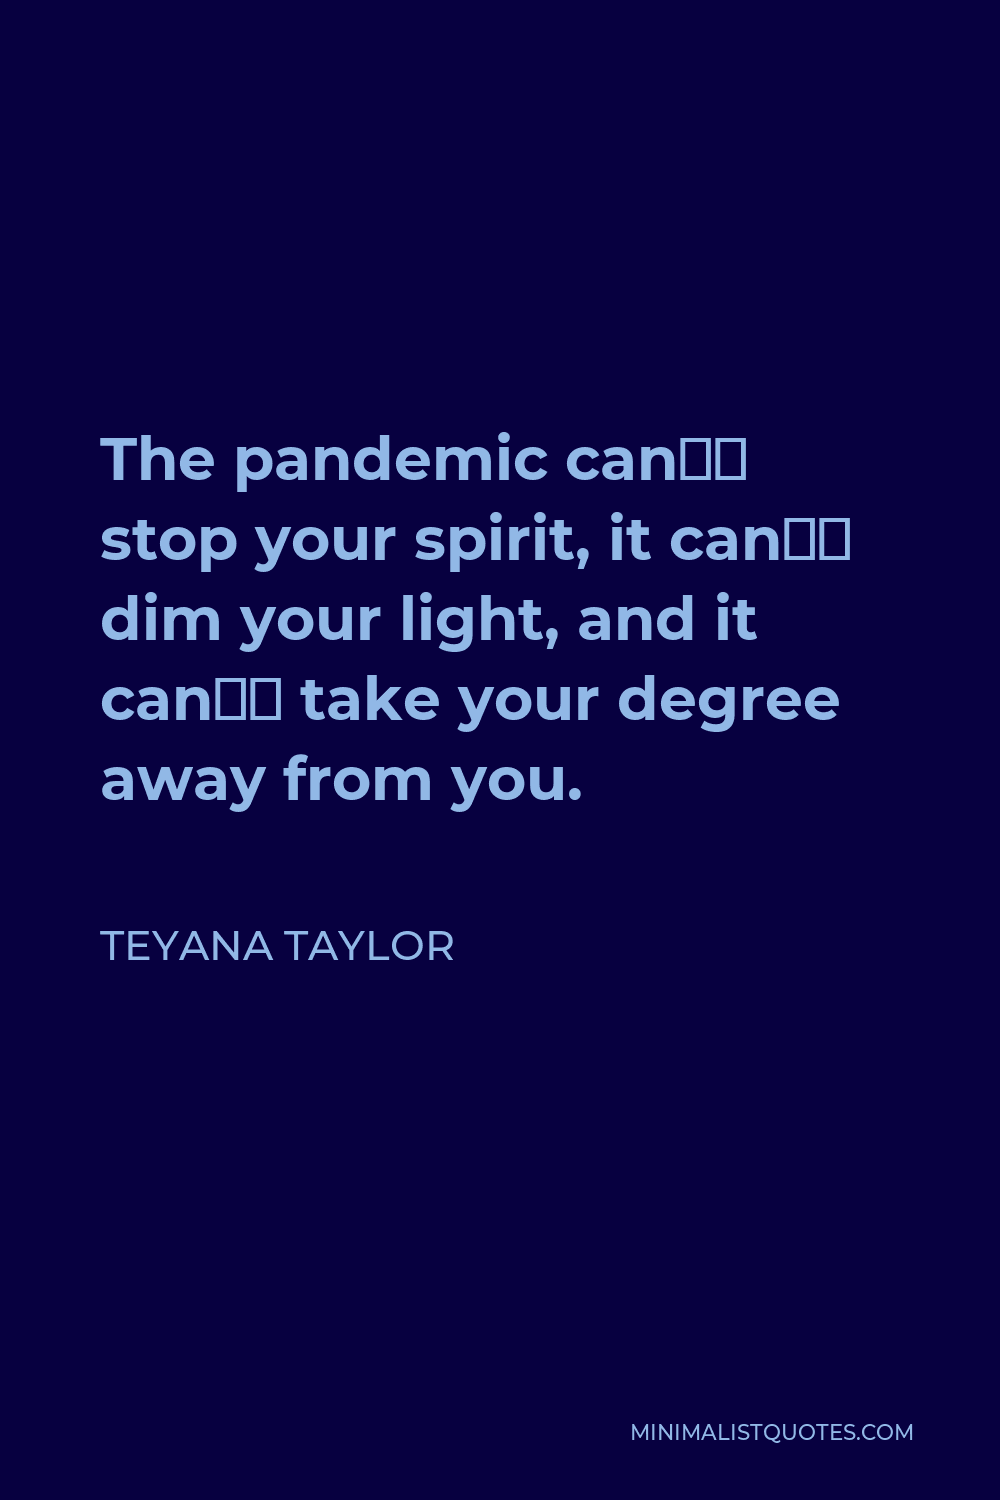 Teyana Taylor Quote - The pandemic can’t stop your spirit, it can’t dim your light, and it can’t take your degree away from you.